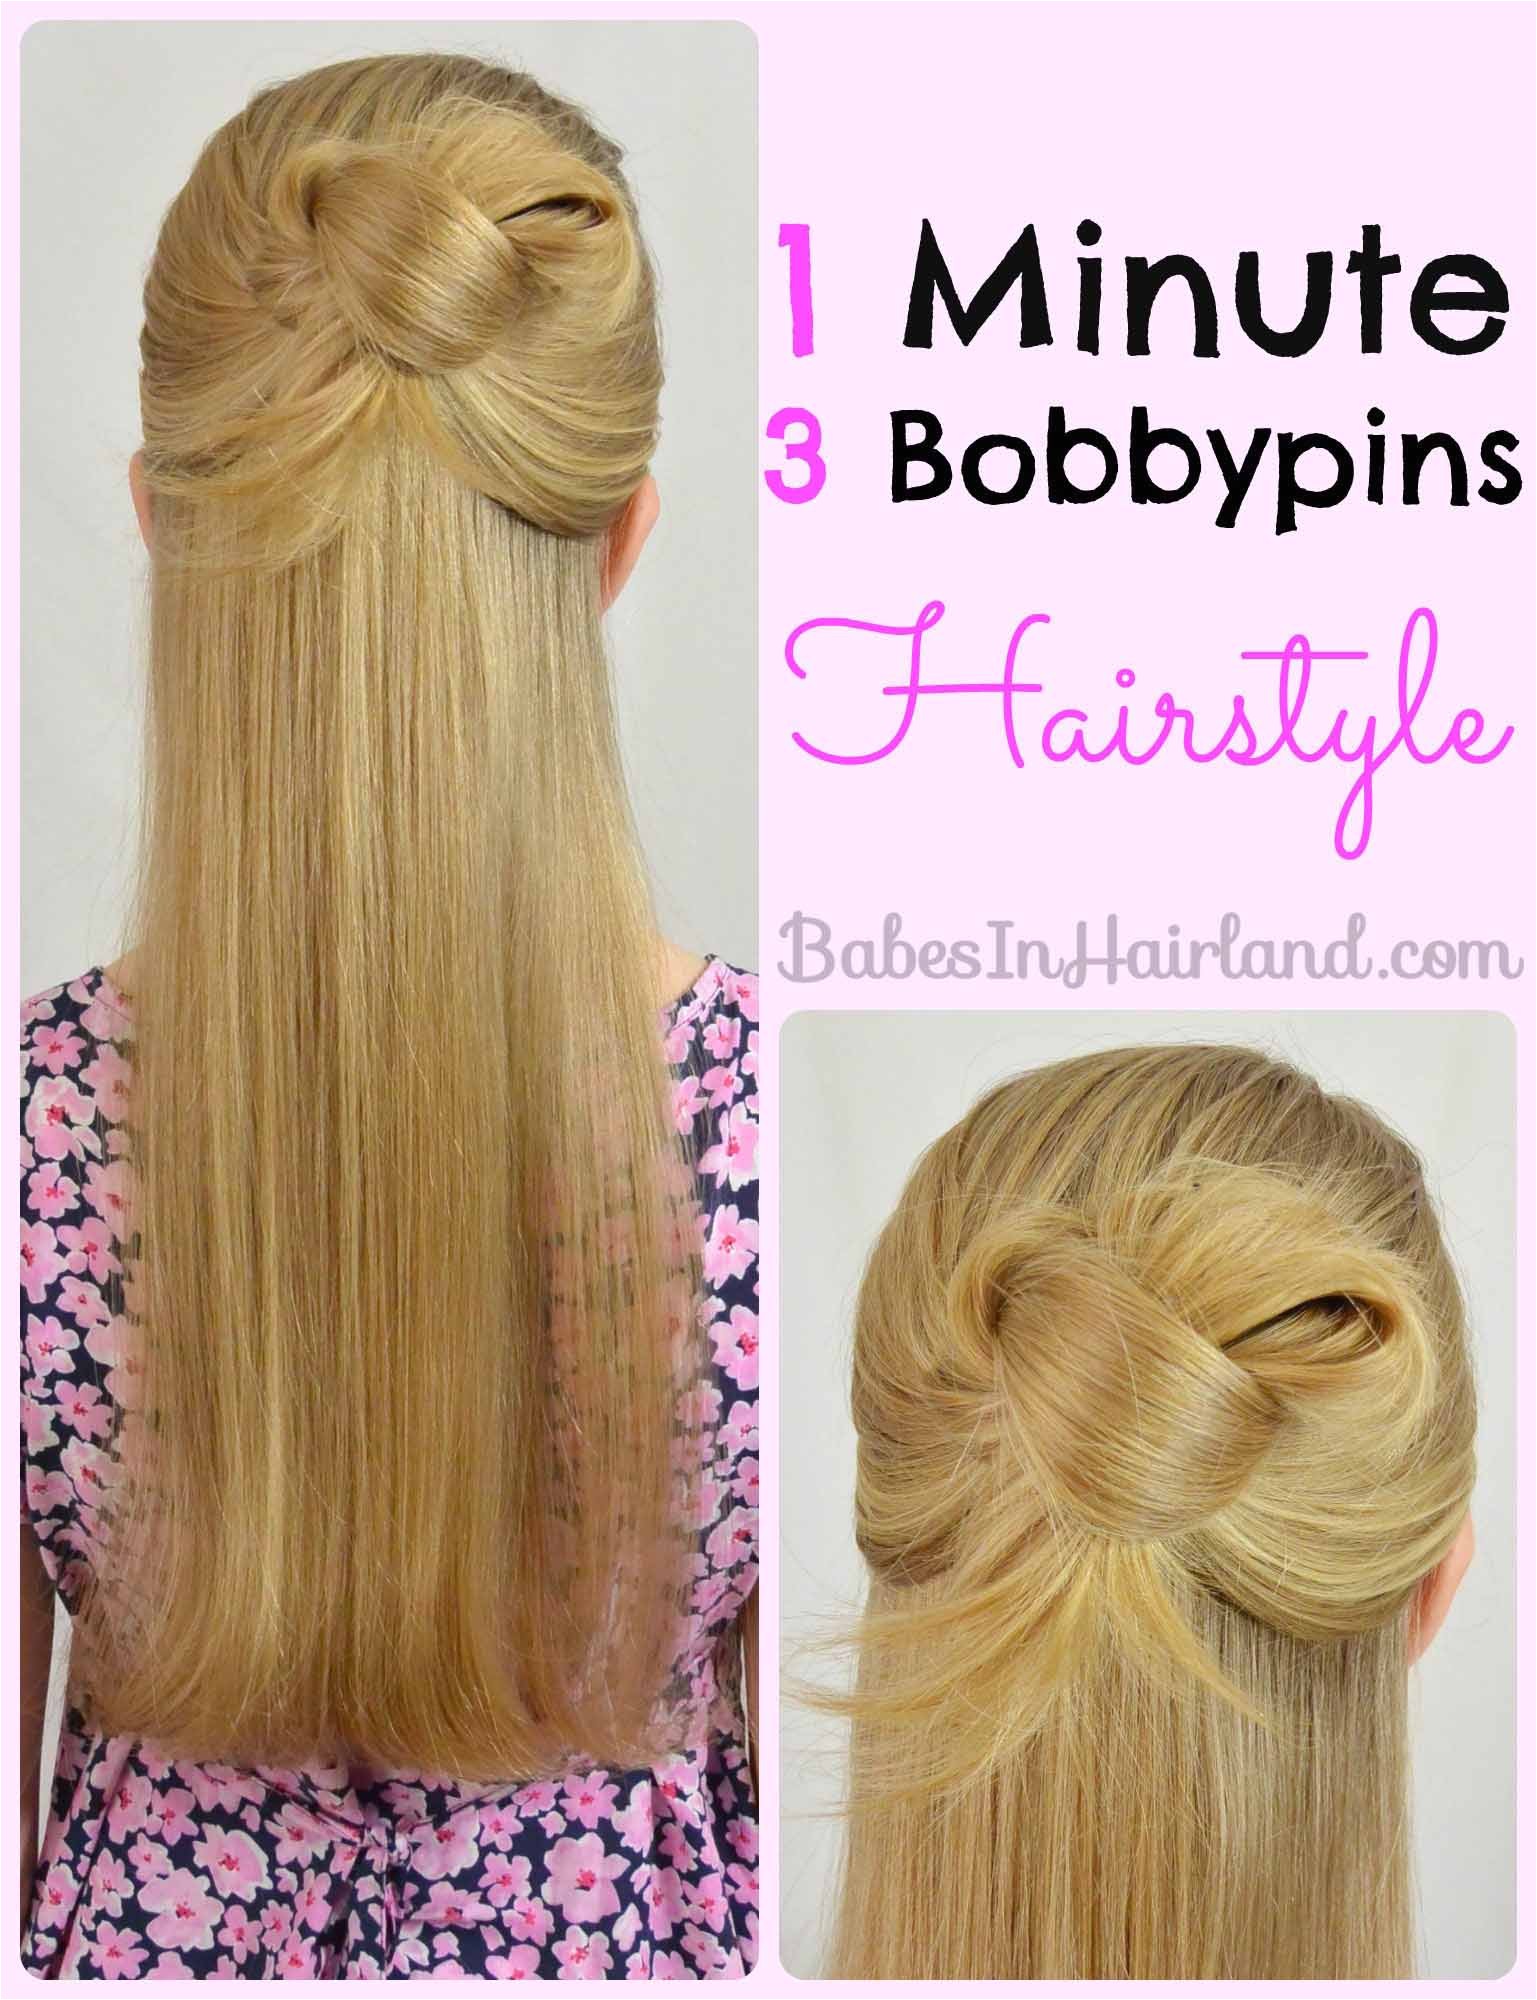 Easy One Minute Hairstyles Easy 1 Minute Knotted Hairstyle Babes In Hairland